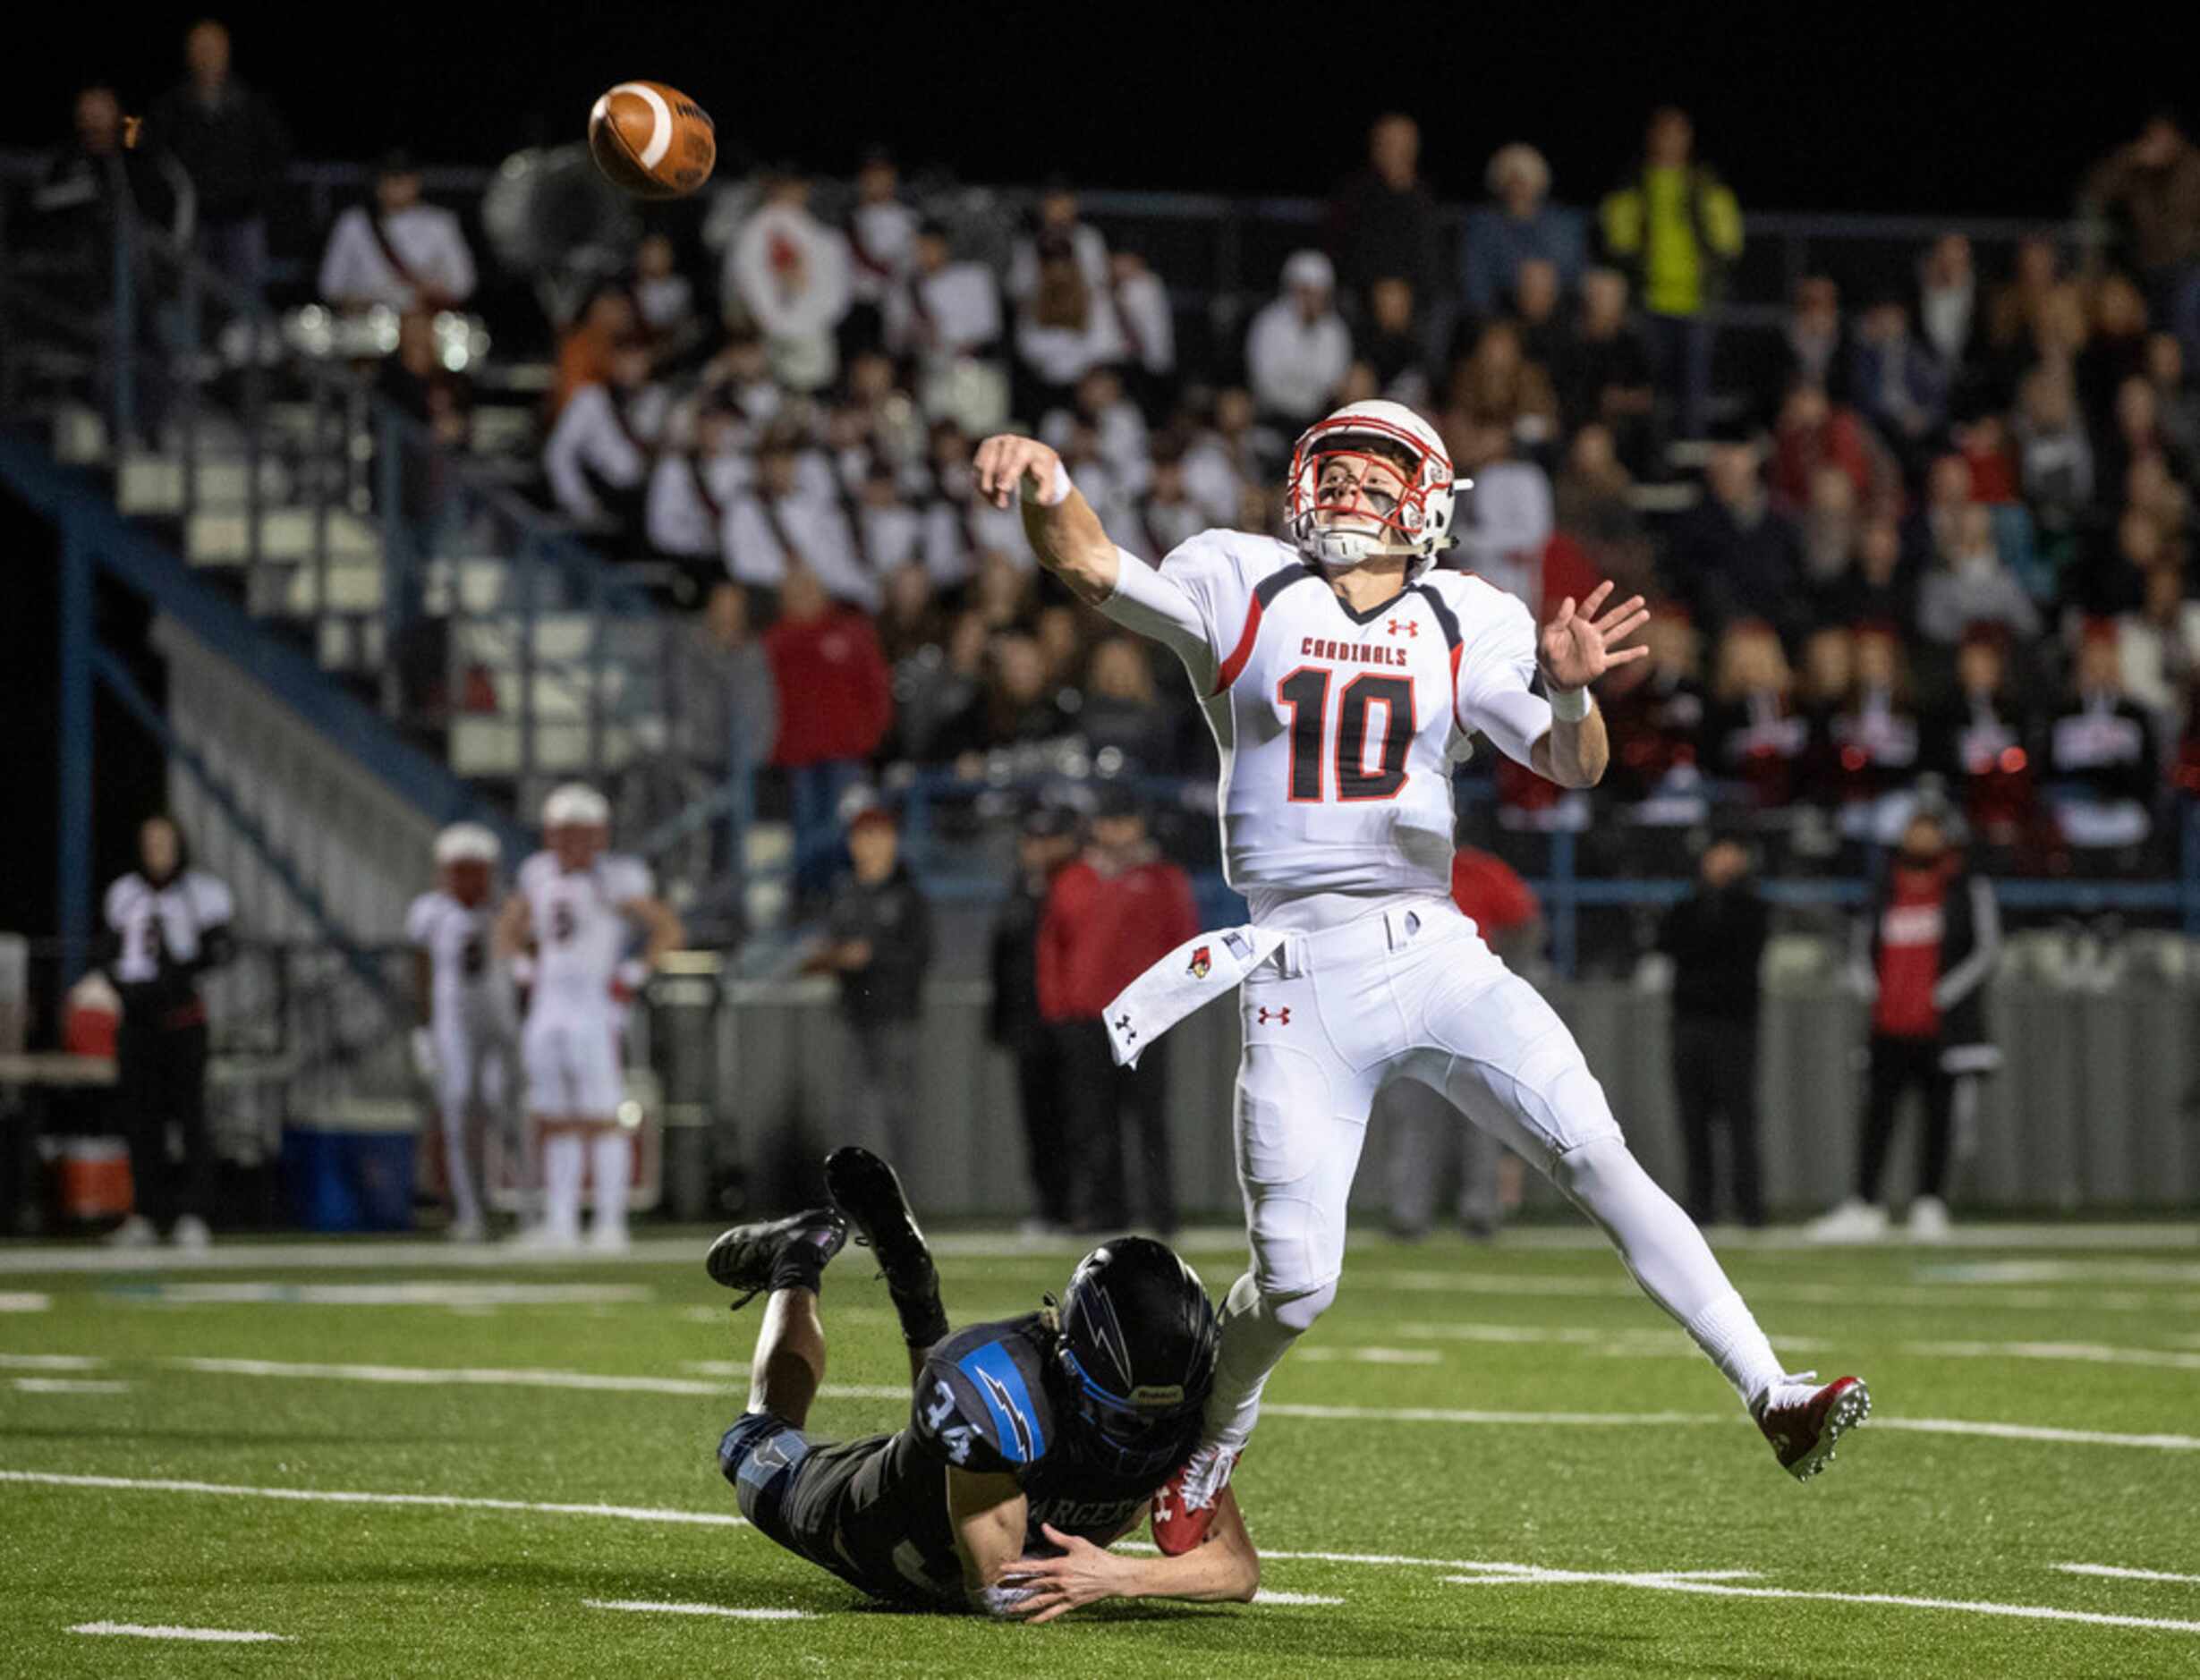 Fort Worth Christian senior quarterback Carson Cross (10) just gets a pass off ahead of the...